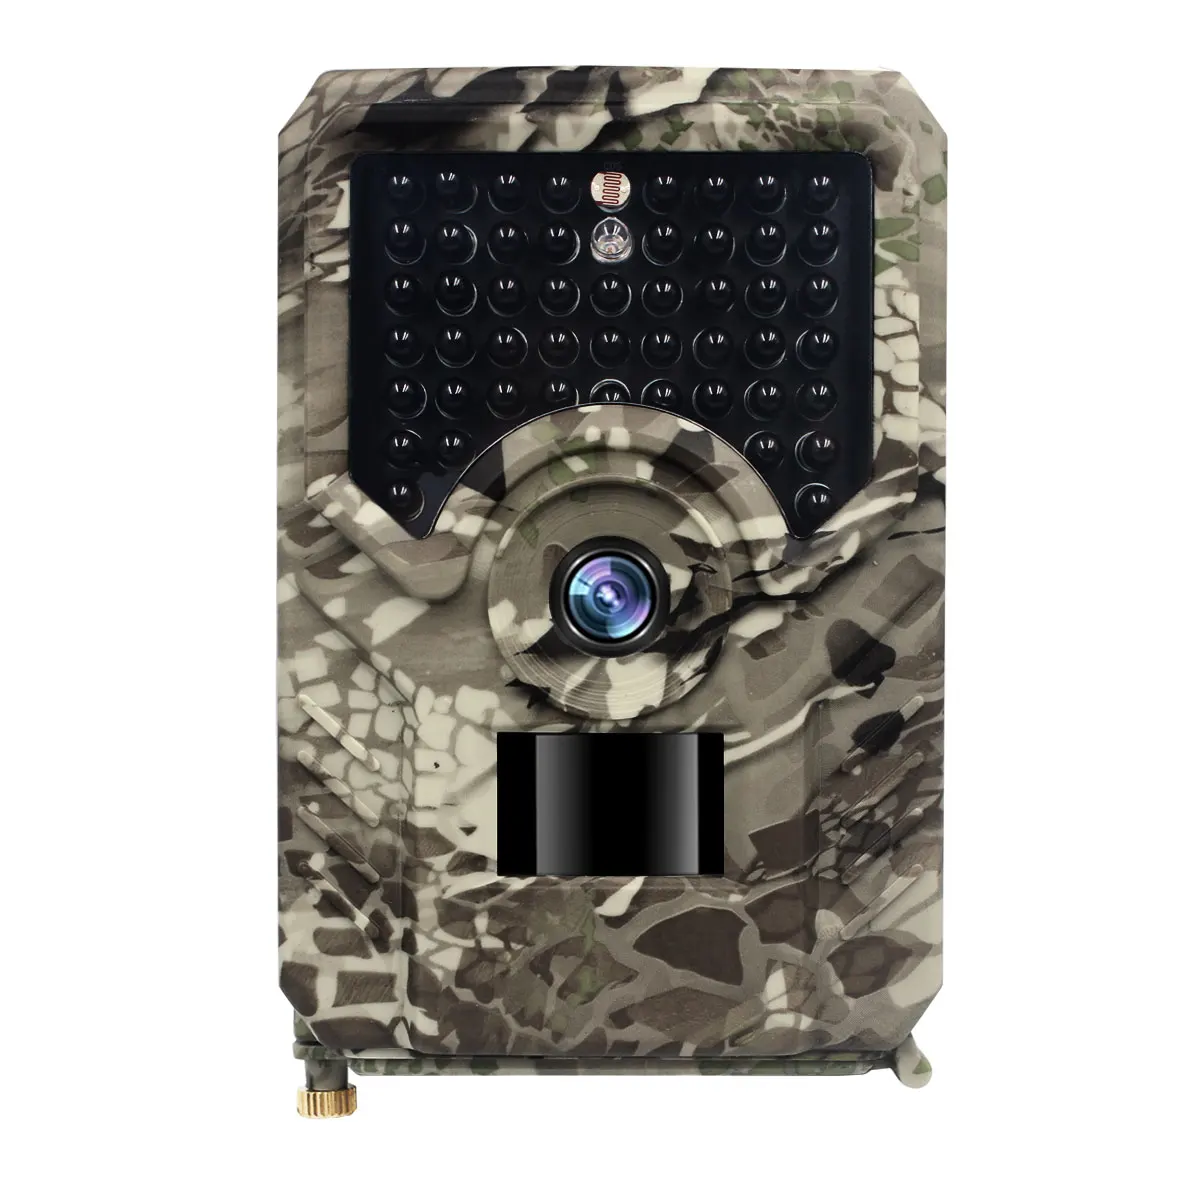 

16Mp Camaras De Caza Thermal Scouting Infrared Night Vision Hunting Kamera Pr200 Pro Trap Hunt And Trail Camera